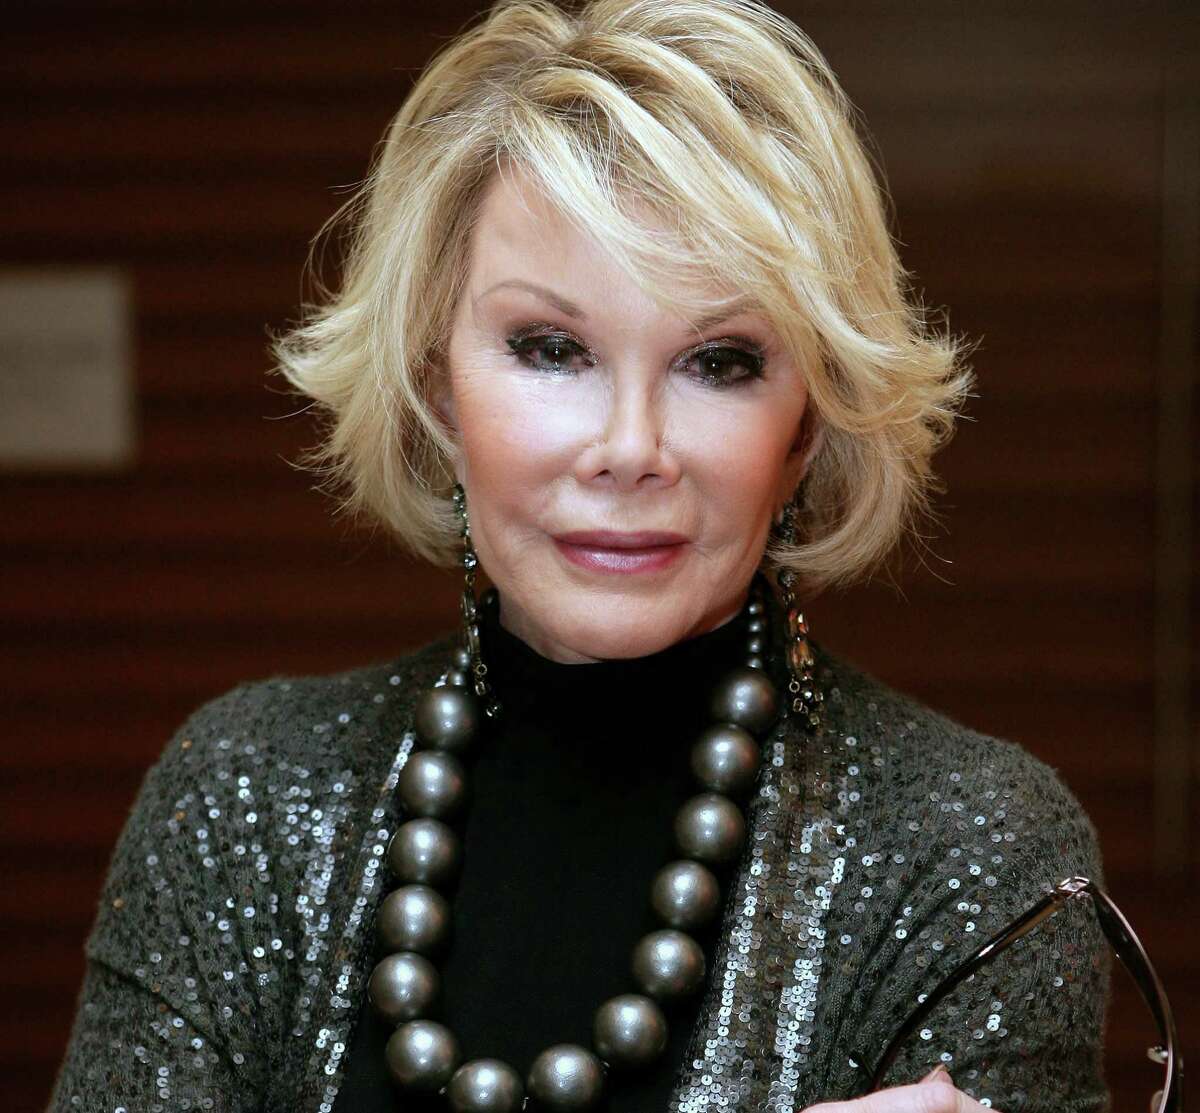 FILE Comedian Joan Rivers Hospitalised After She Stops Breathing Following An Operation On Her Vocal Chords SYDNEY, AUSTRALIA - MARCH 05: International Guest Joan Rivers attends the 2009 Mardi Gras VIP party at the Zeta Bar of the Hilton Hotel on March 5, 2009 in Sydney, Australia.